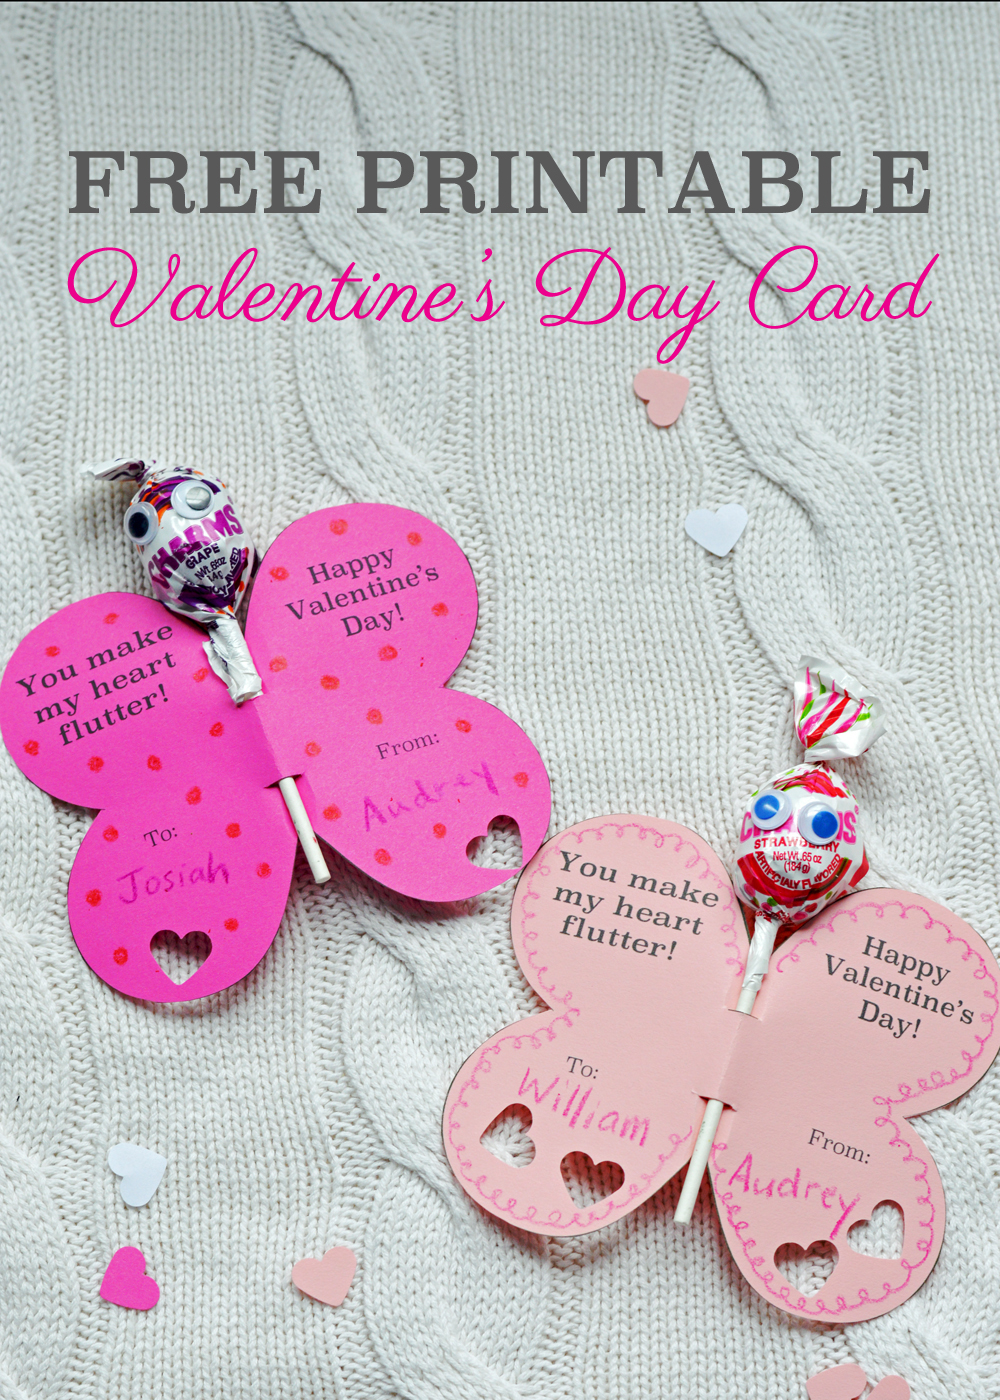 Free printable butterfly valentines day card